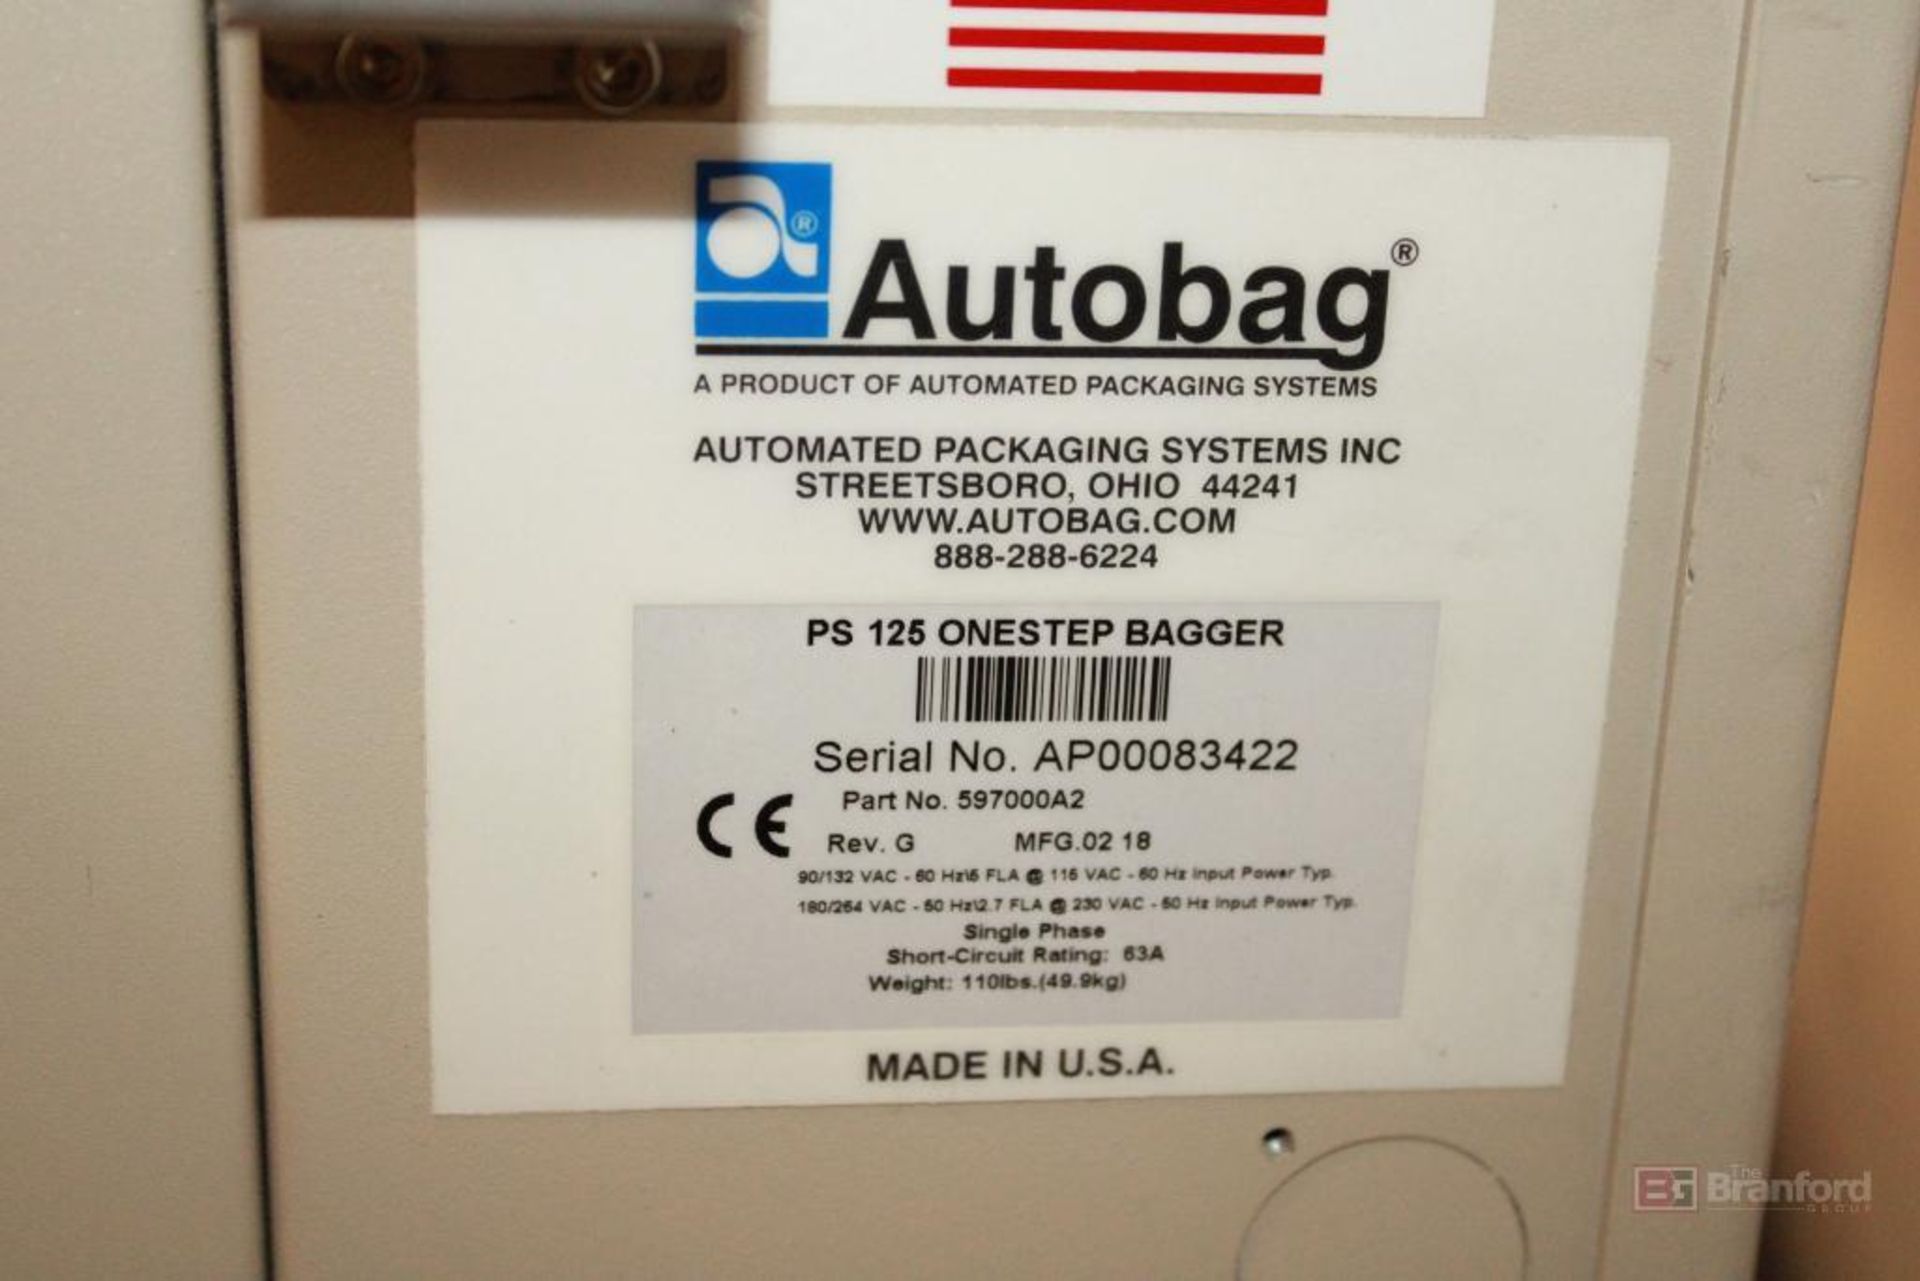 Autobag PS125 OneStep Bagger Pacesetter Autobag - Image 4 of 4